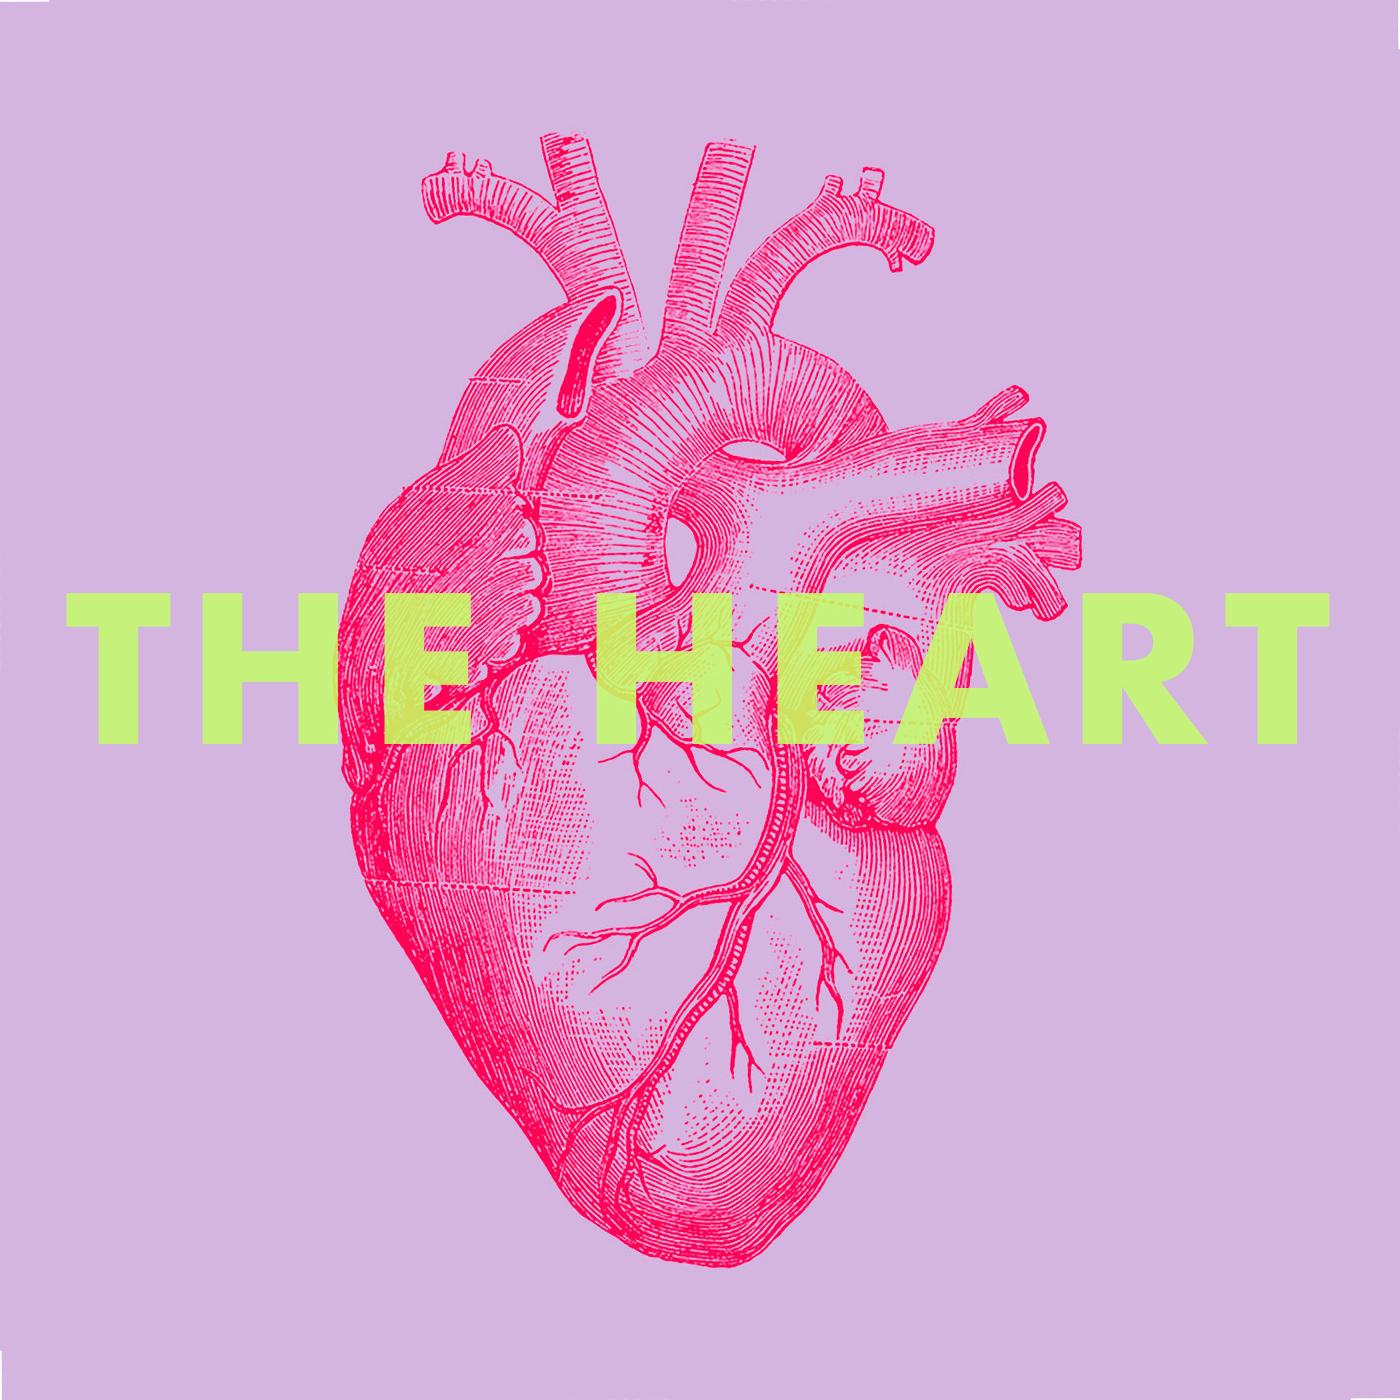 Thumbnail for "Welcome to the Heart".